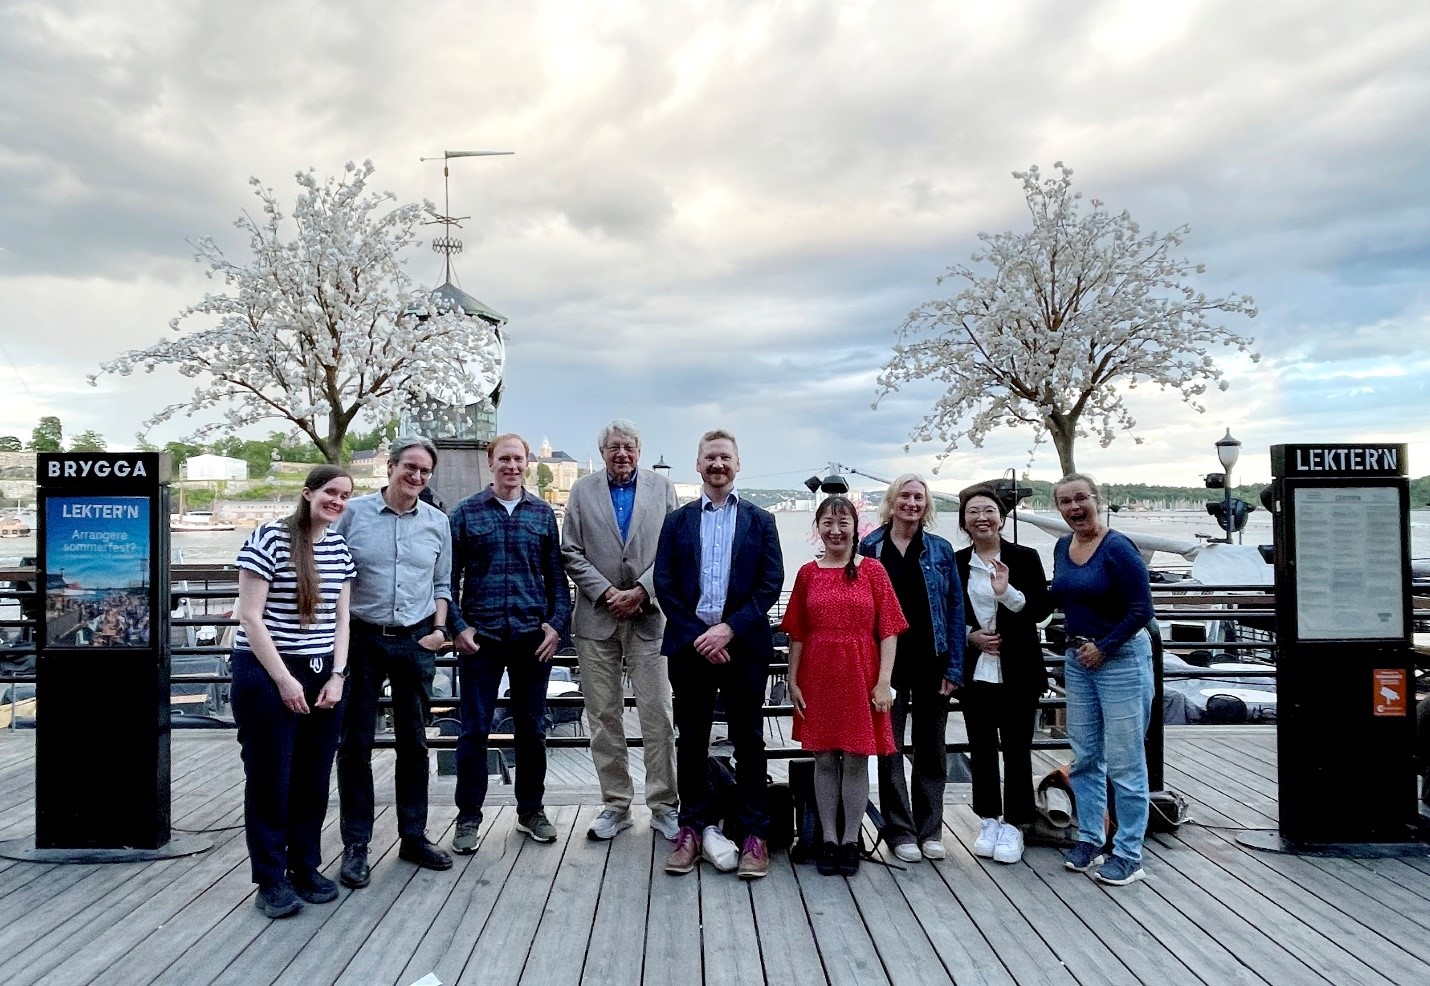 Some of the MAREA workshop participants in Oslo. Prof Hynes of SEMRU, third from left.